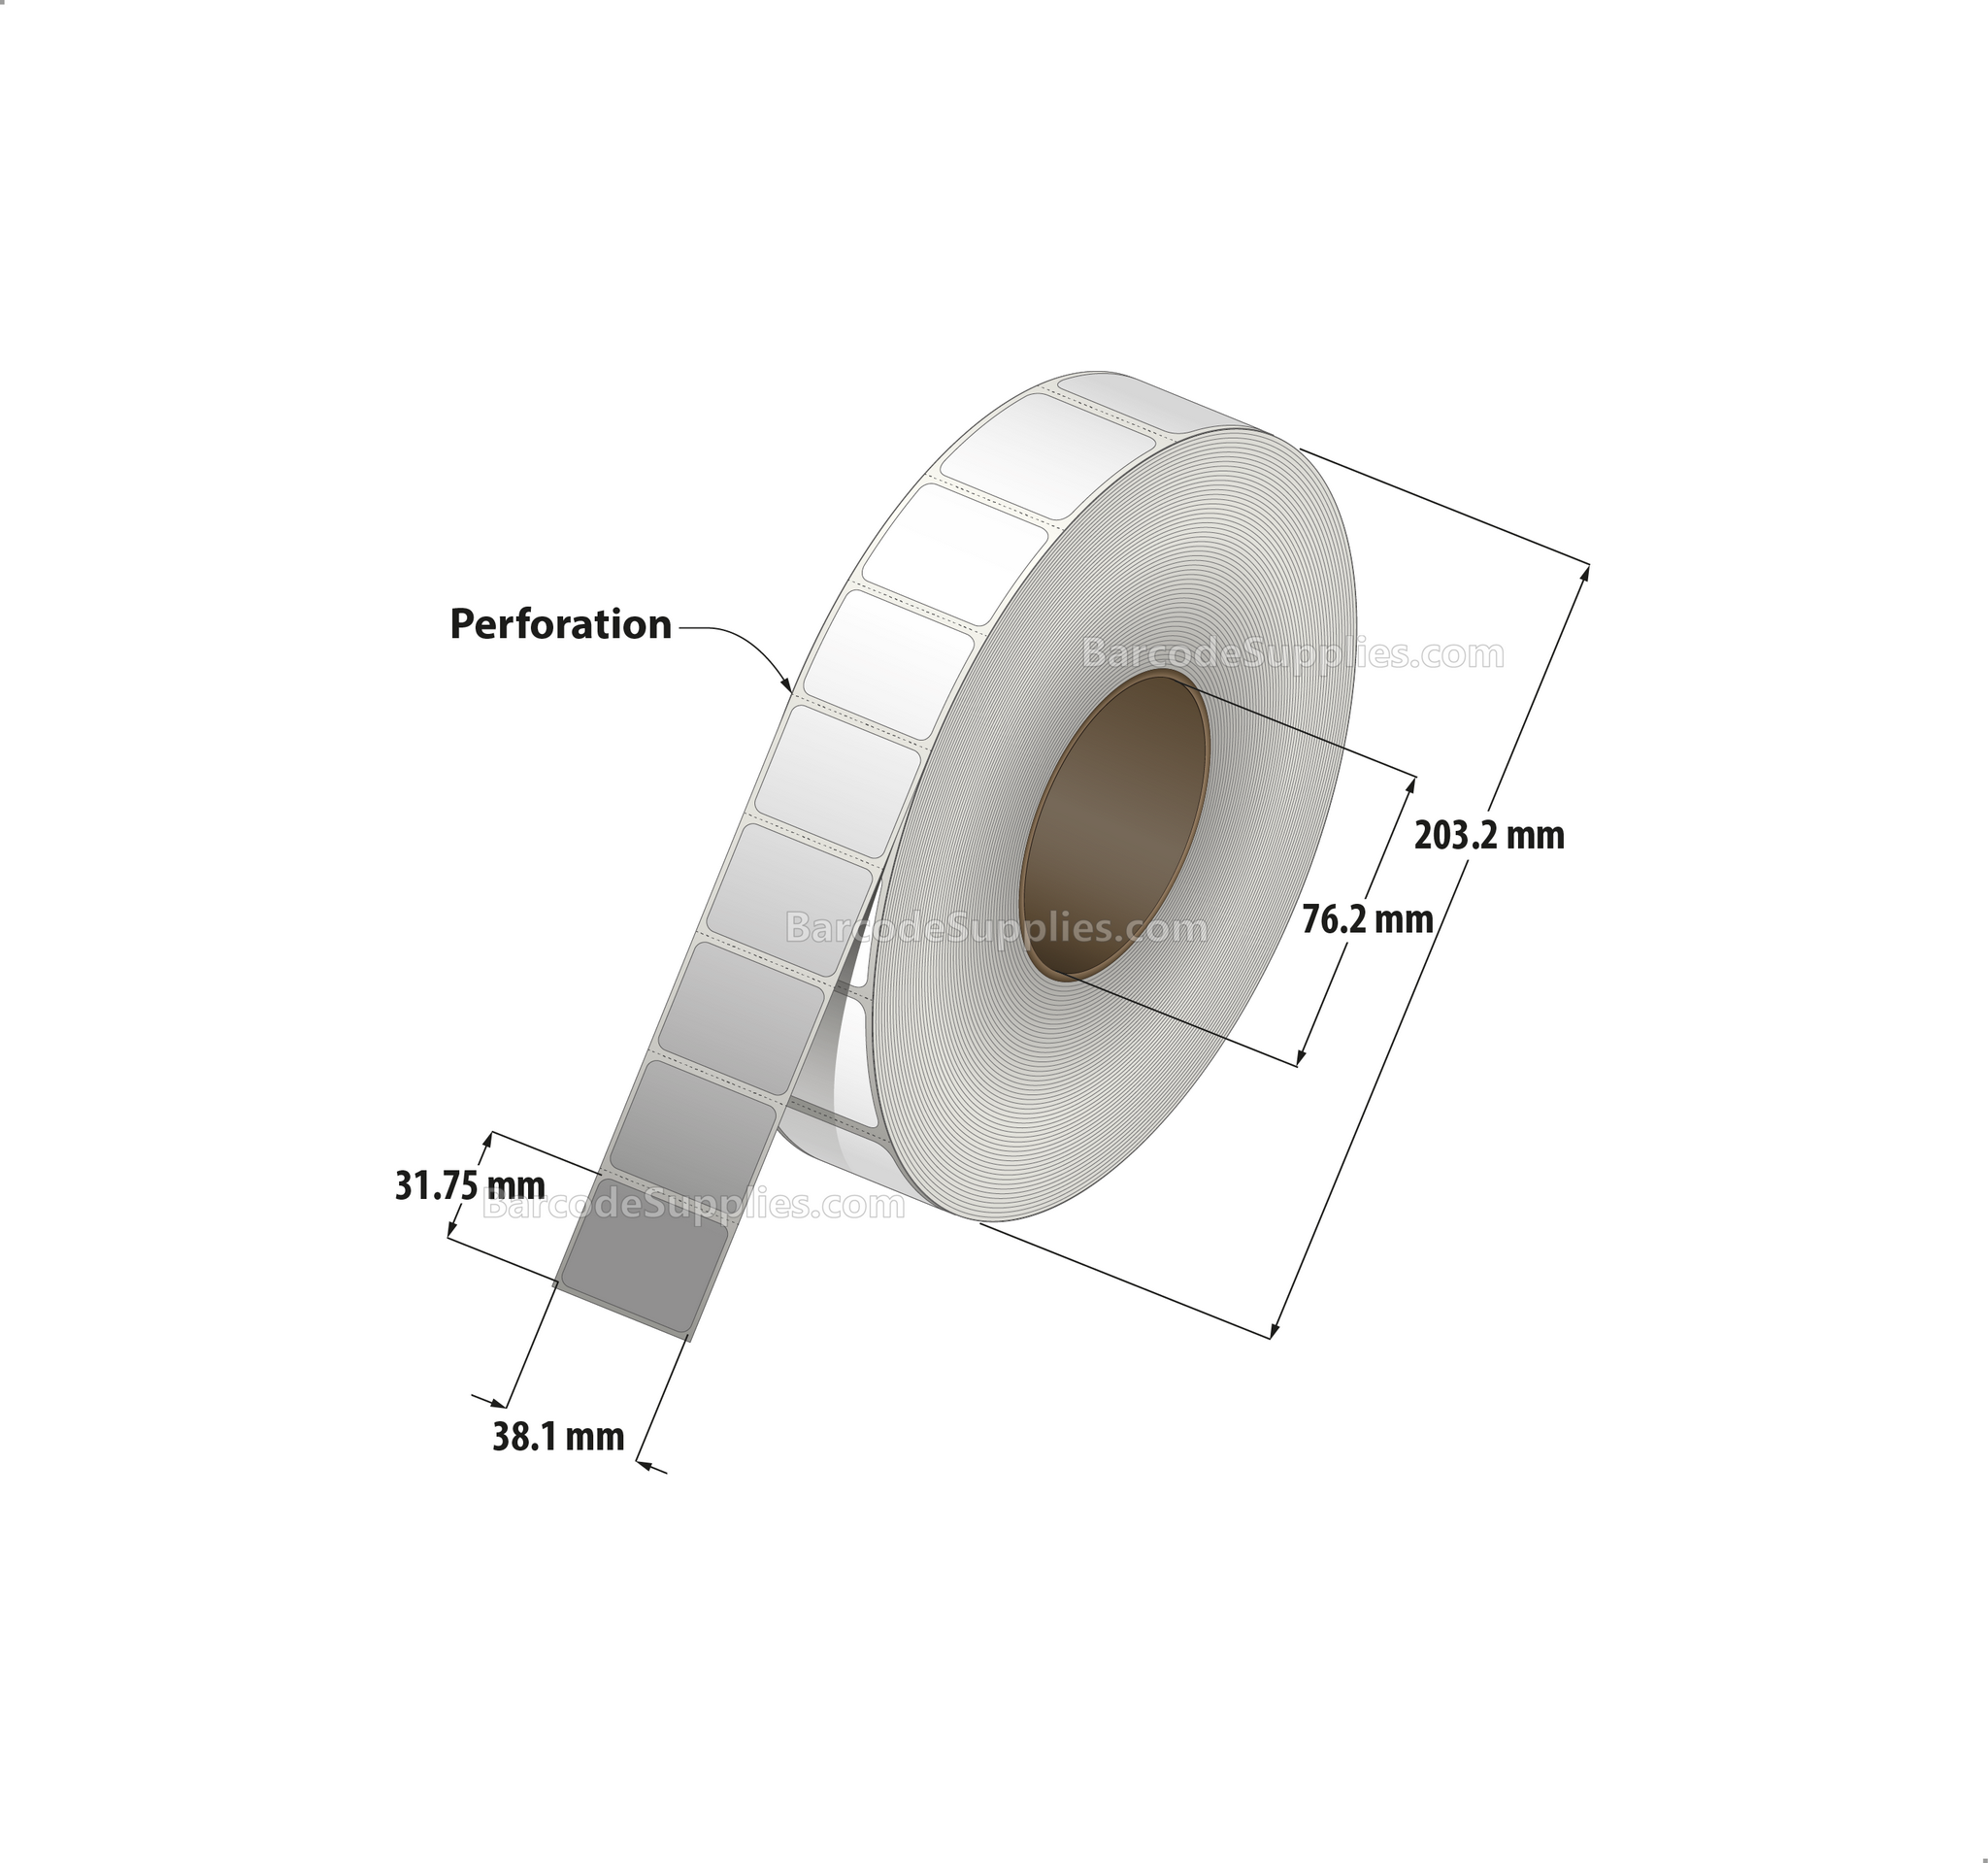 1.5 x 1.25 Thermal Transfer White Labels With Permanent Adhesive - Perforated - 4450 Labels Per Roll - Carton Of 8 Rolls - 35600 Labels Total - MPN: RT-15-125-4450-3